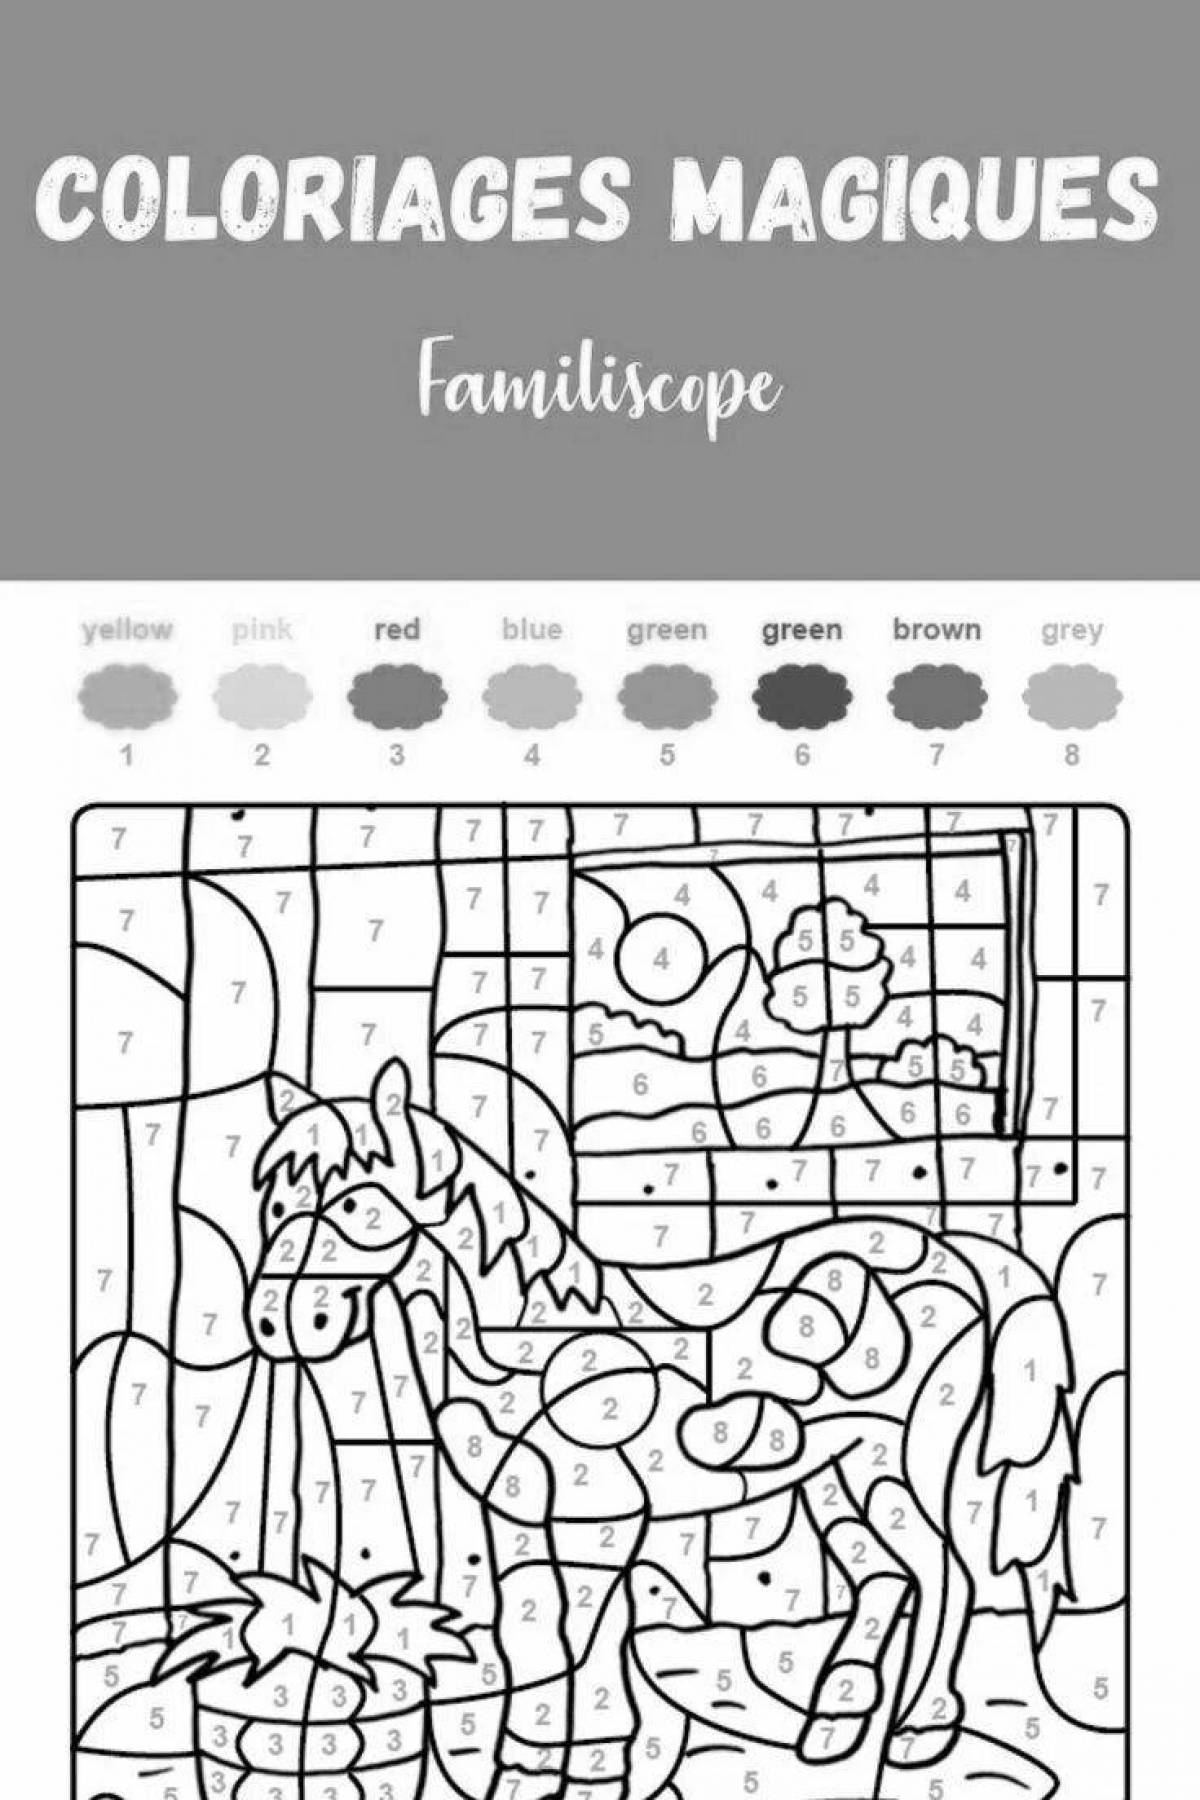 Fancy unicorn coloring by numbers for kids